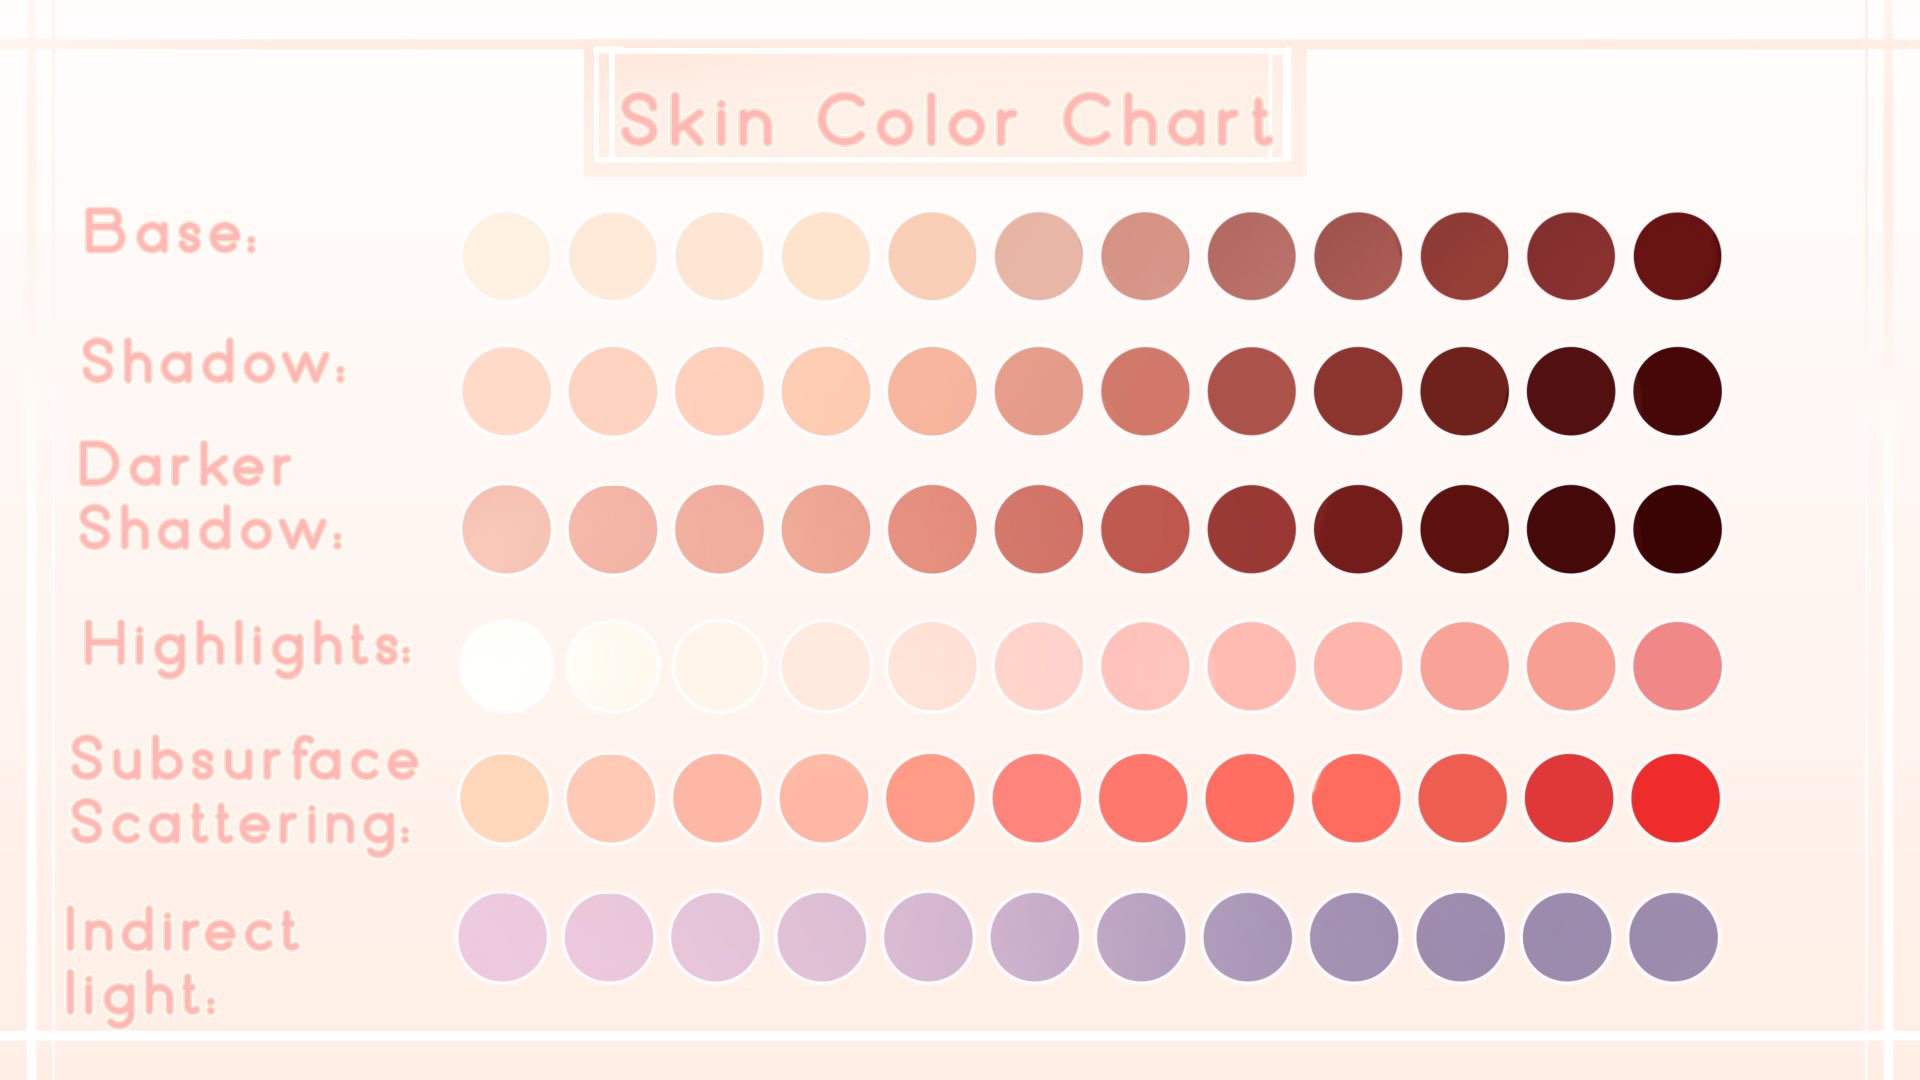 Vivaly 在 Twitter 上 I Made A Simple Anime Skin Shading Tutorial I Ve Included A Color Chart To Show Different Skin Tones And Sorry If My Explanation Or English Isn T Great Gt Gt